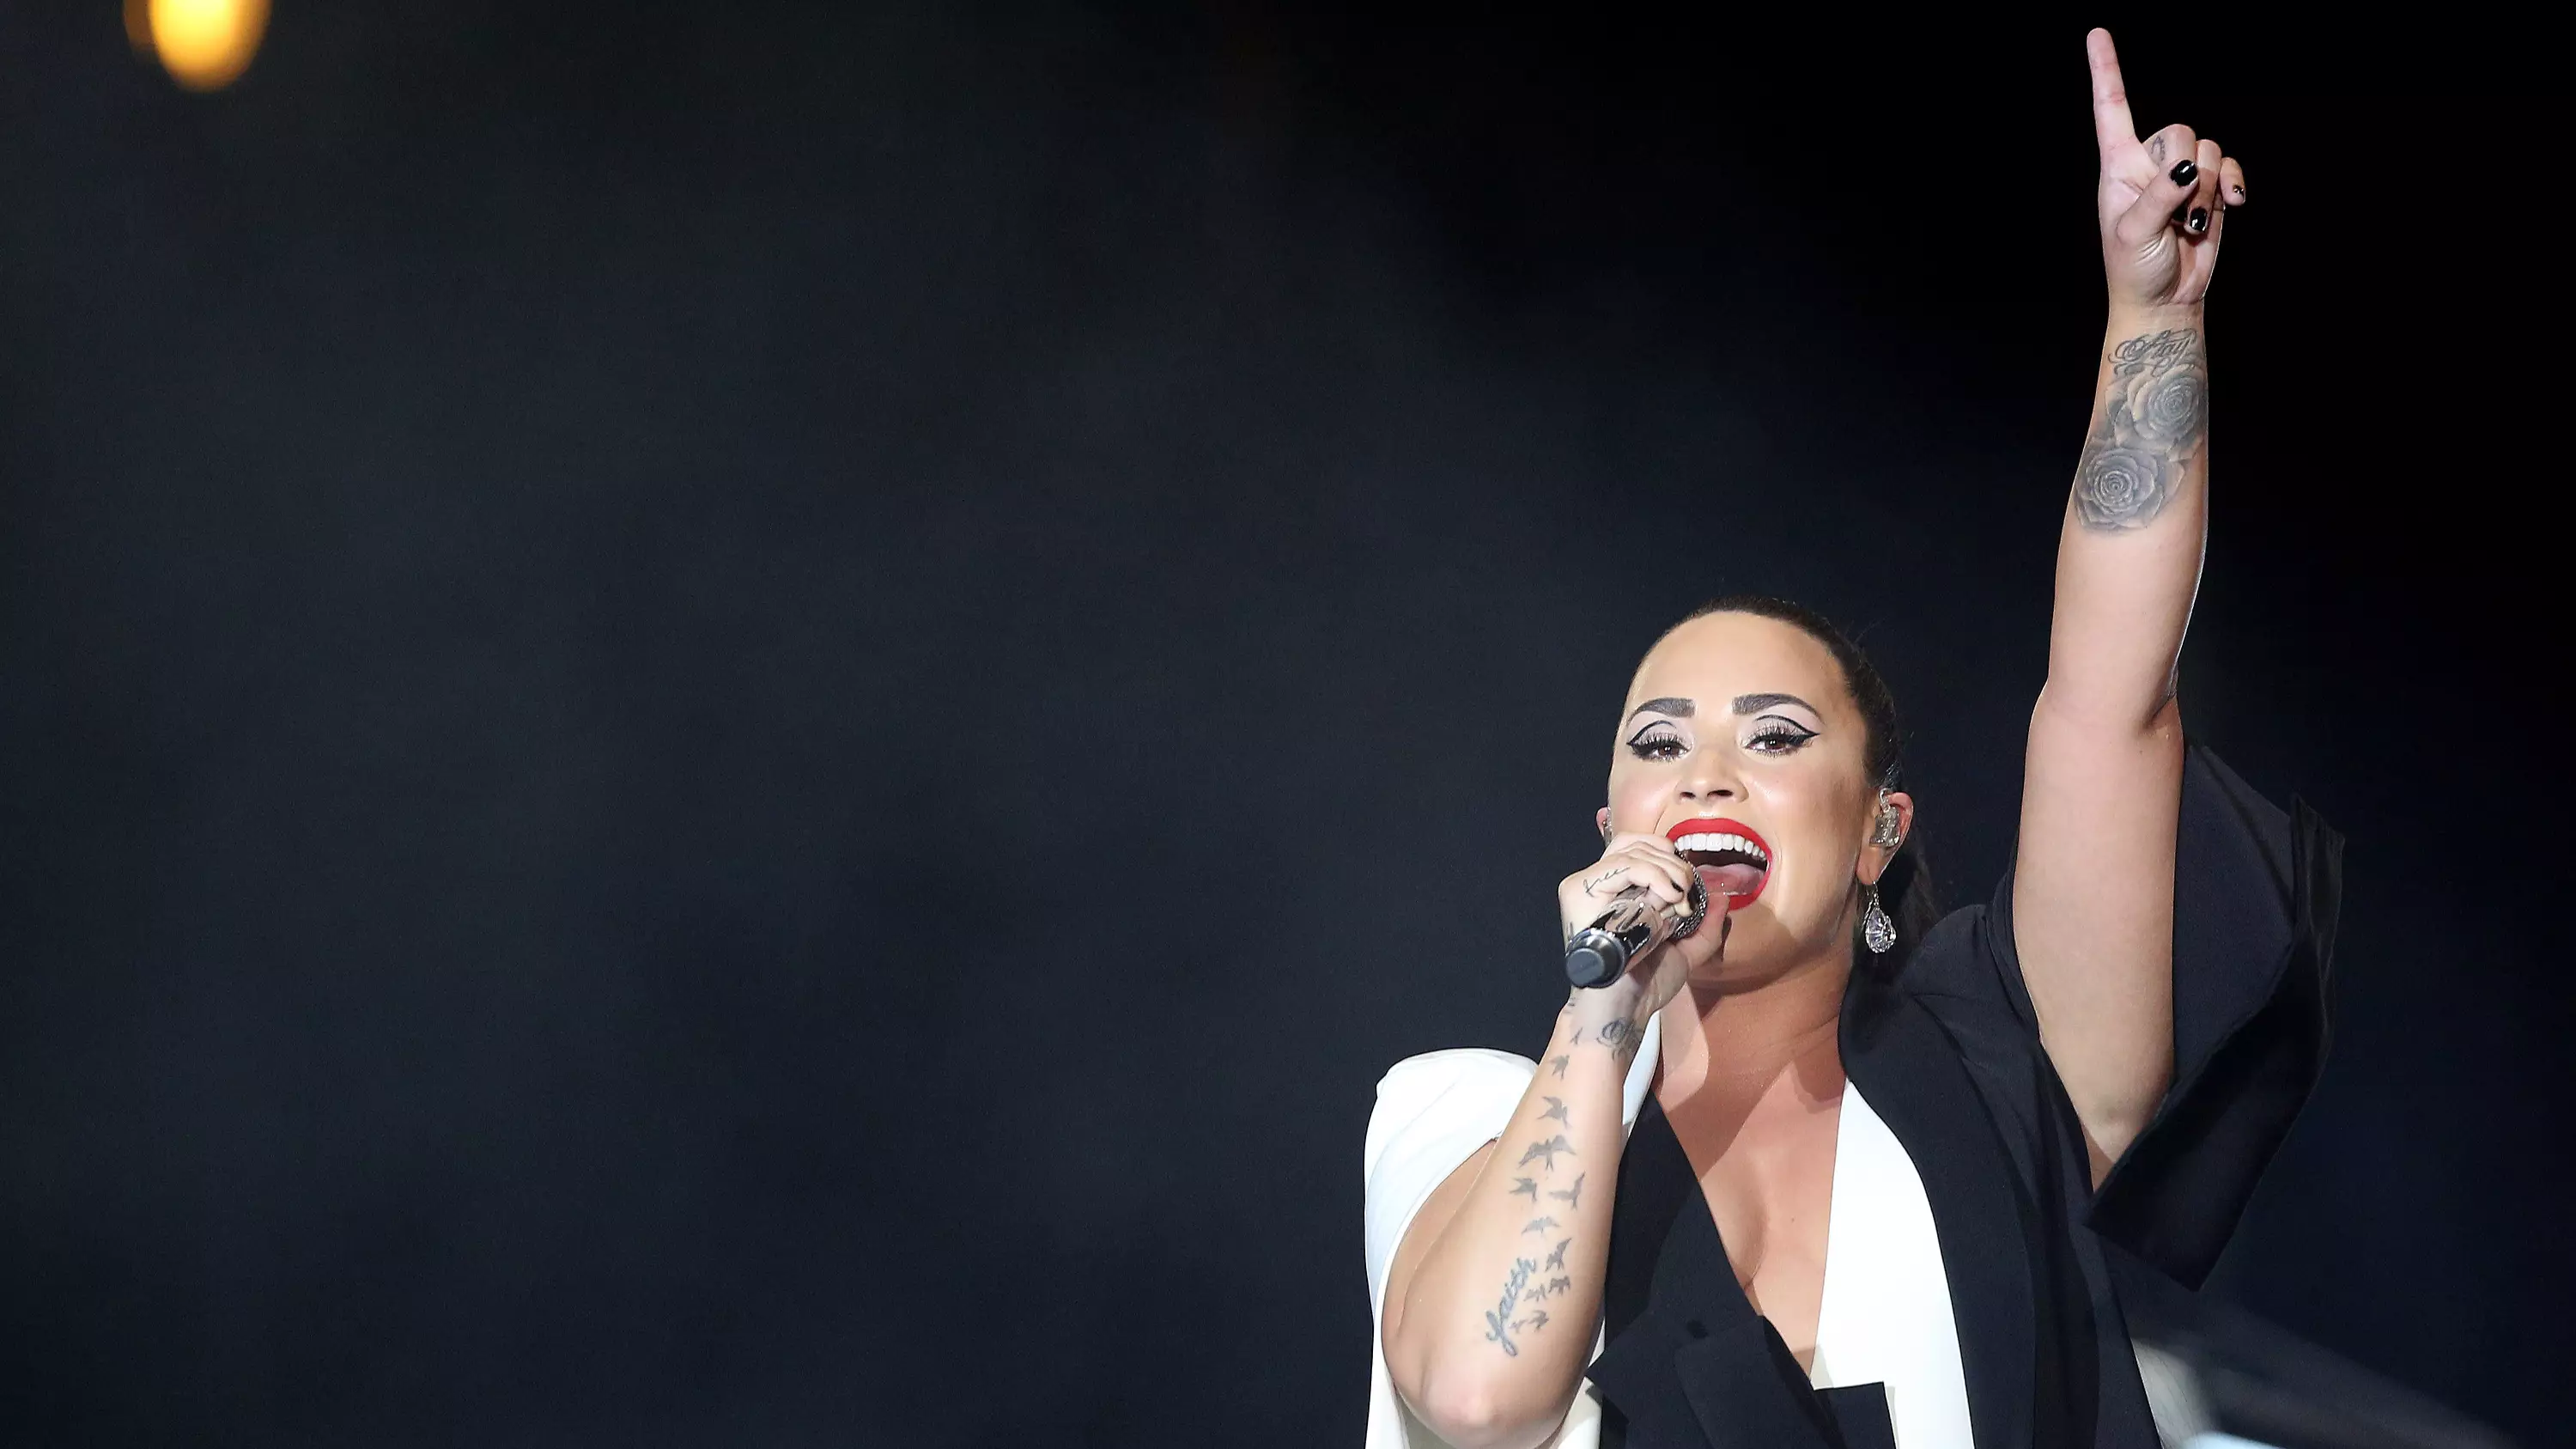 Demi Lovato Is "Awake And With Her Family" According To A Statement